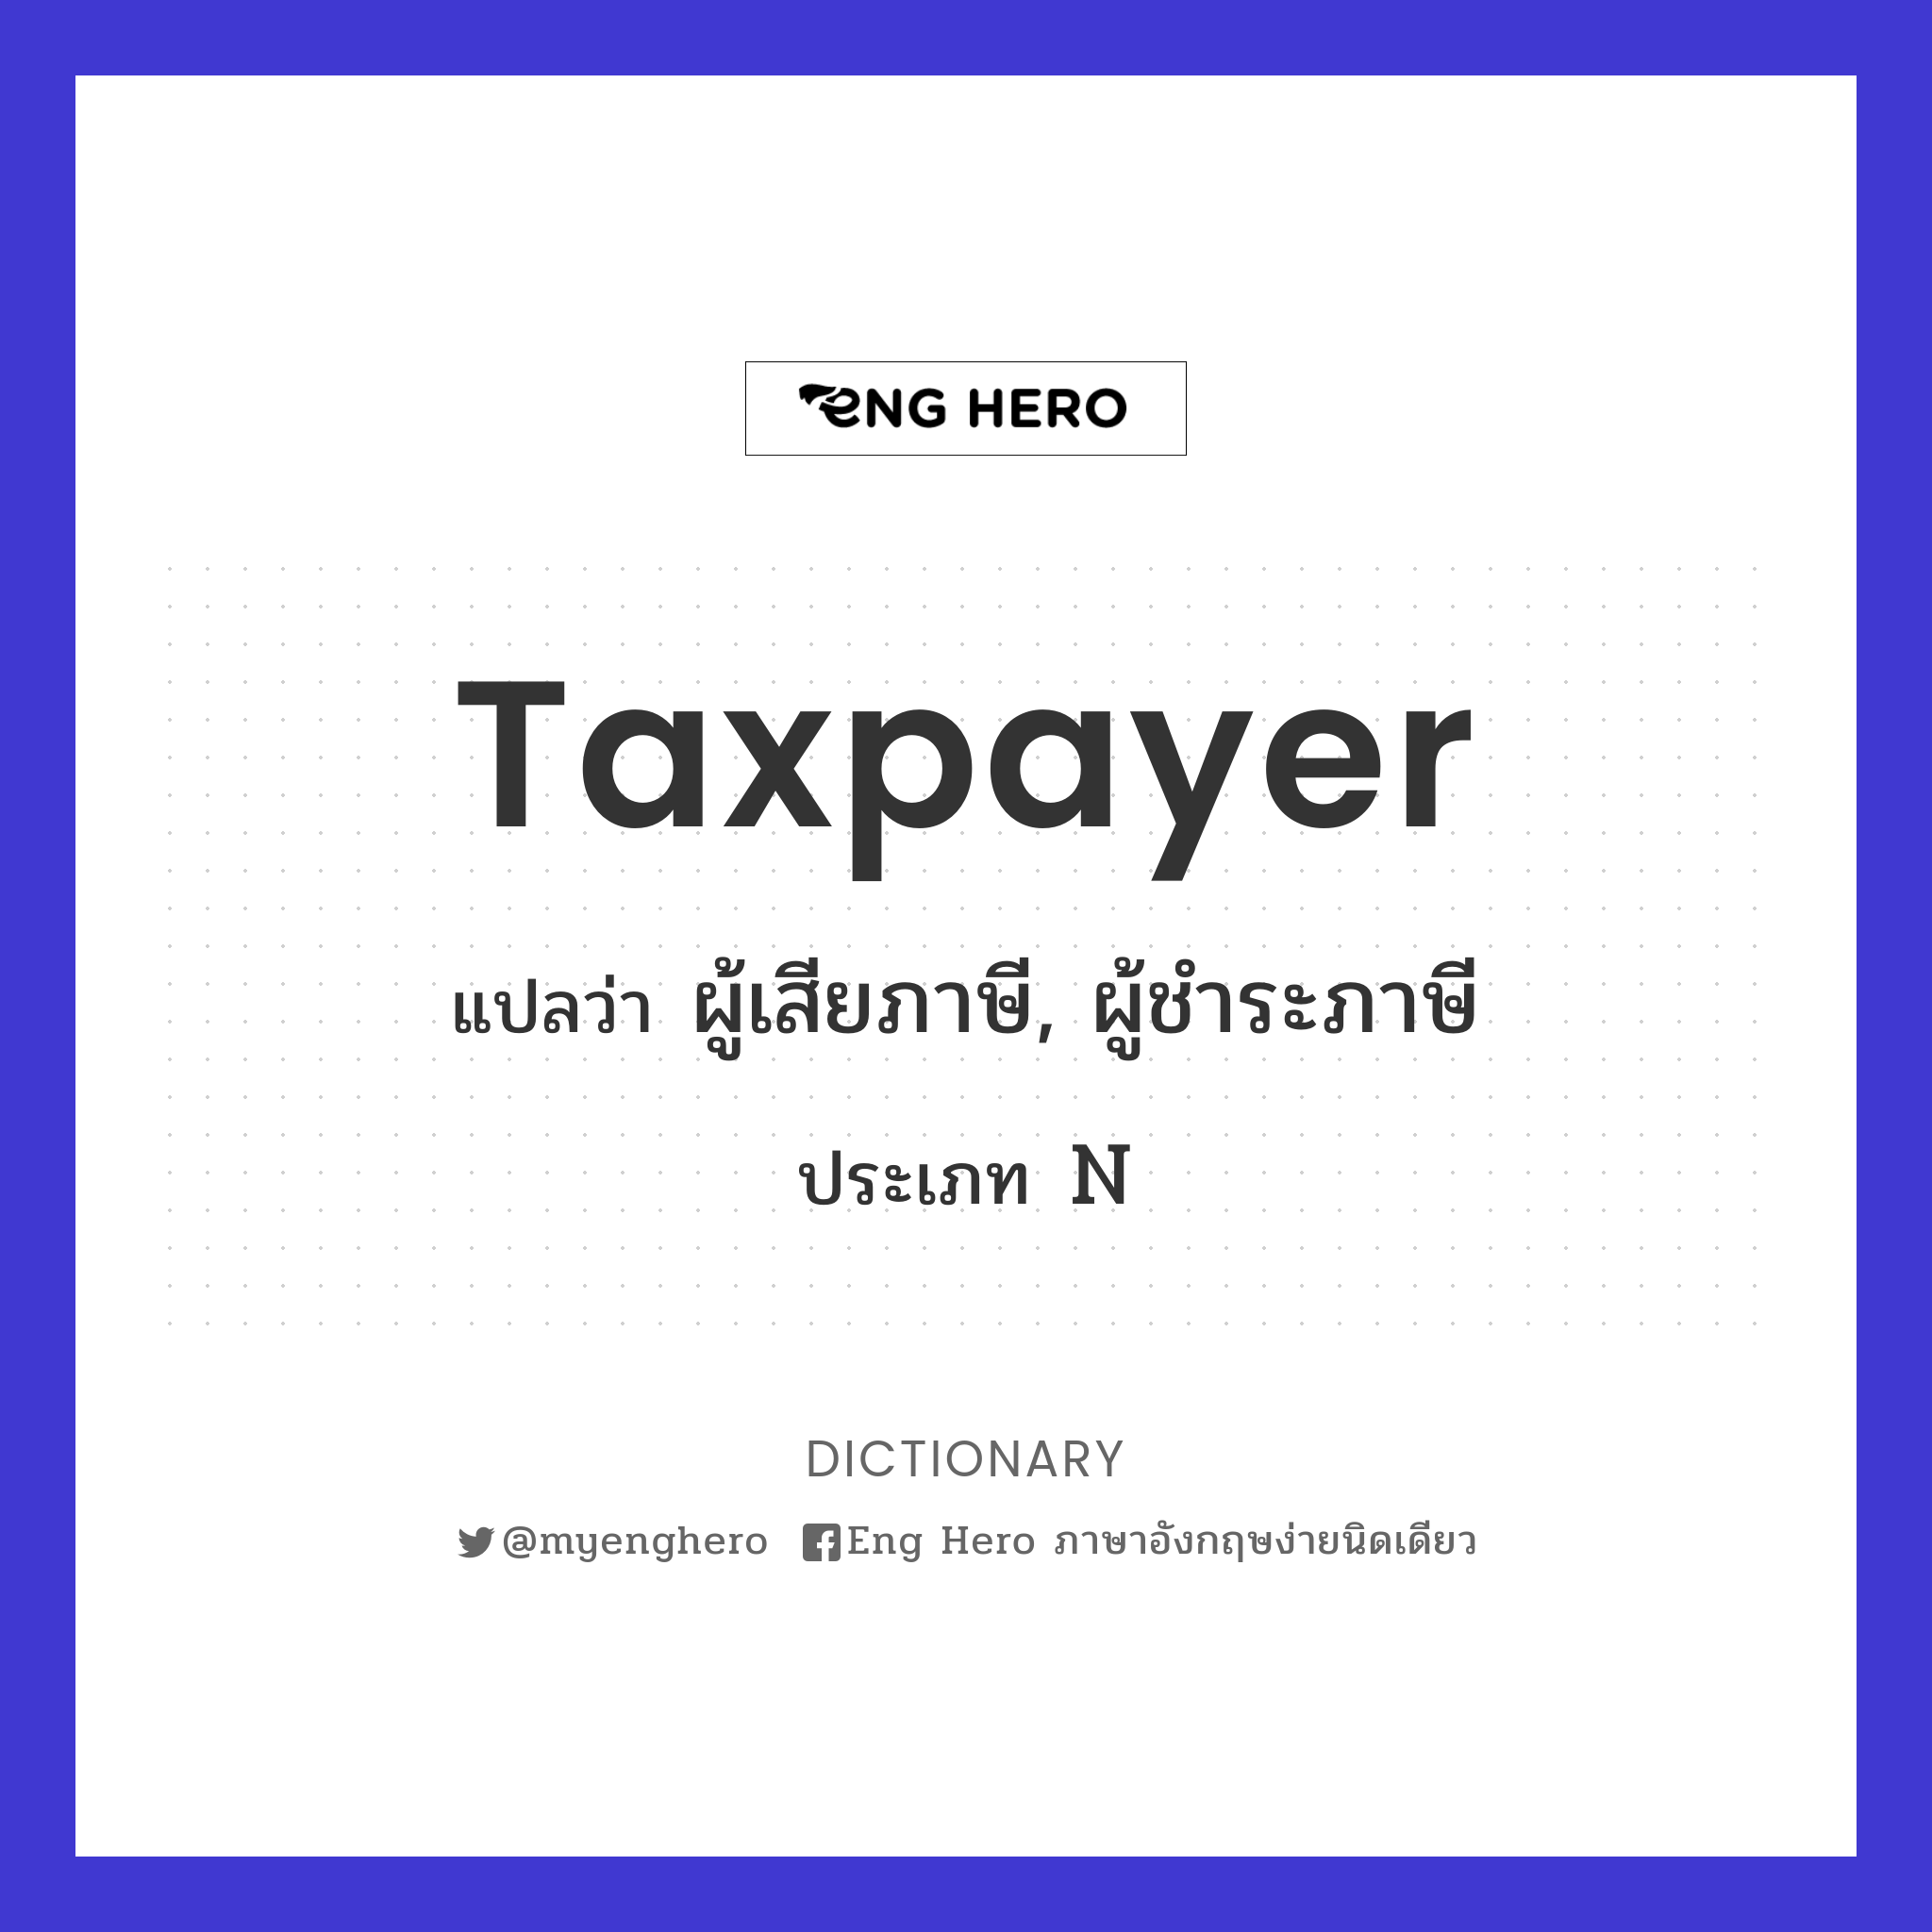 taxpayer